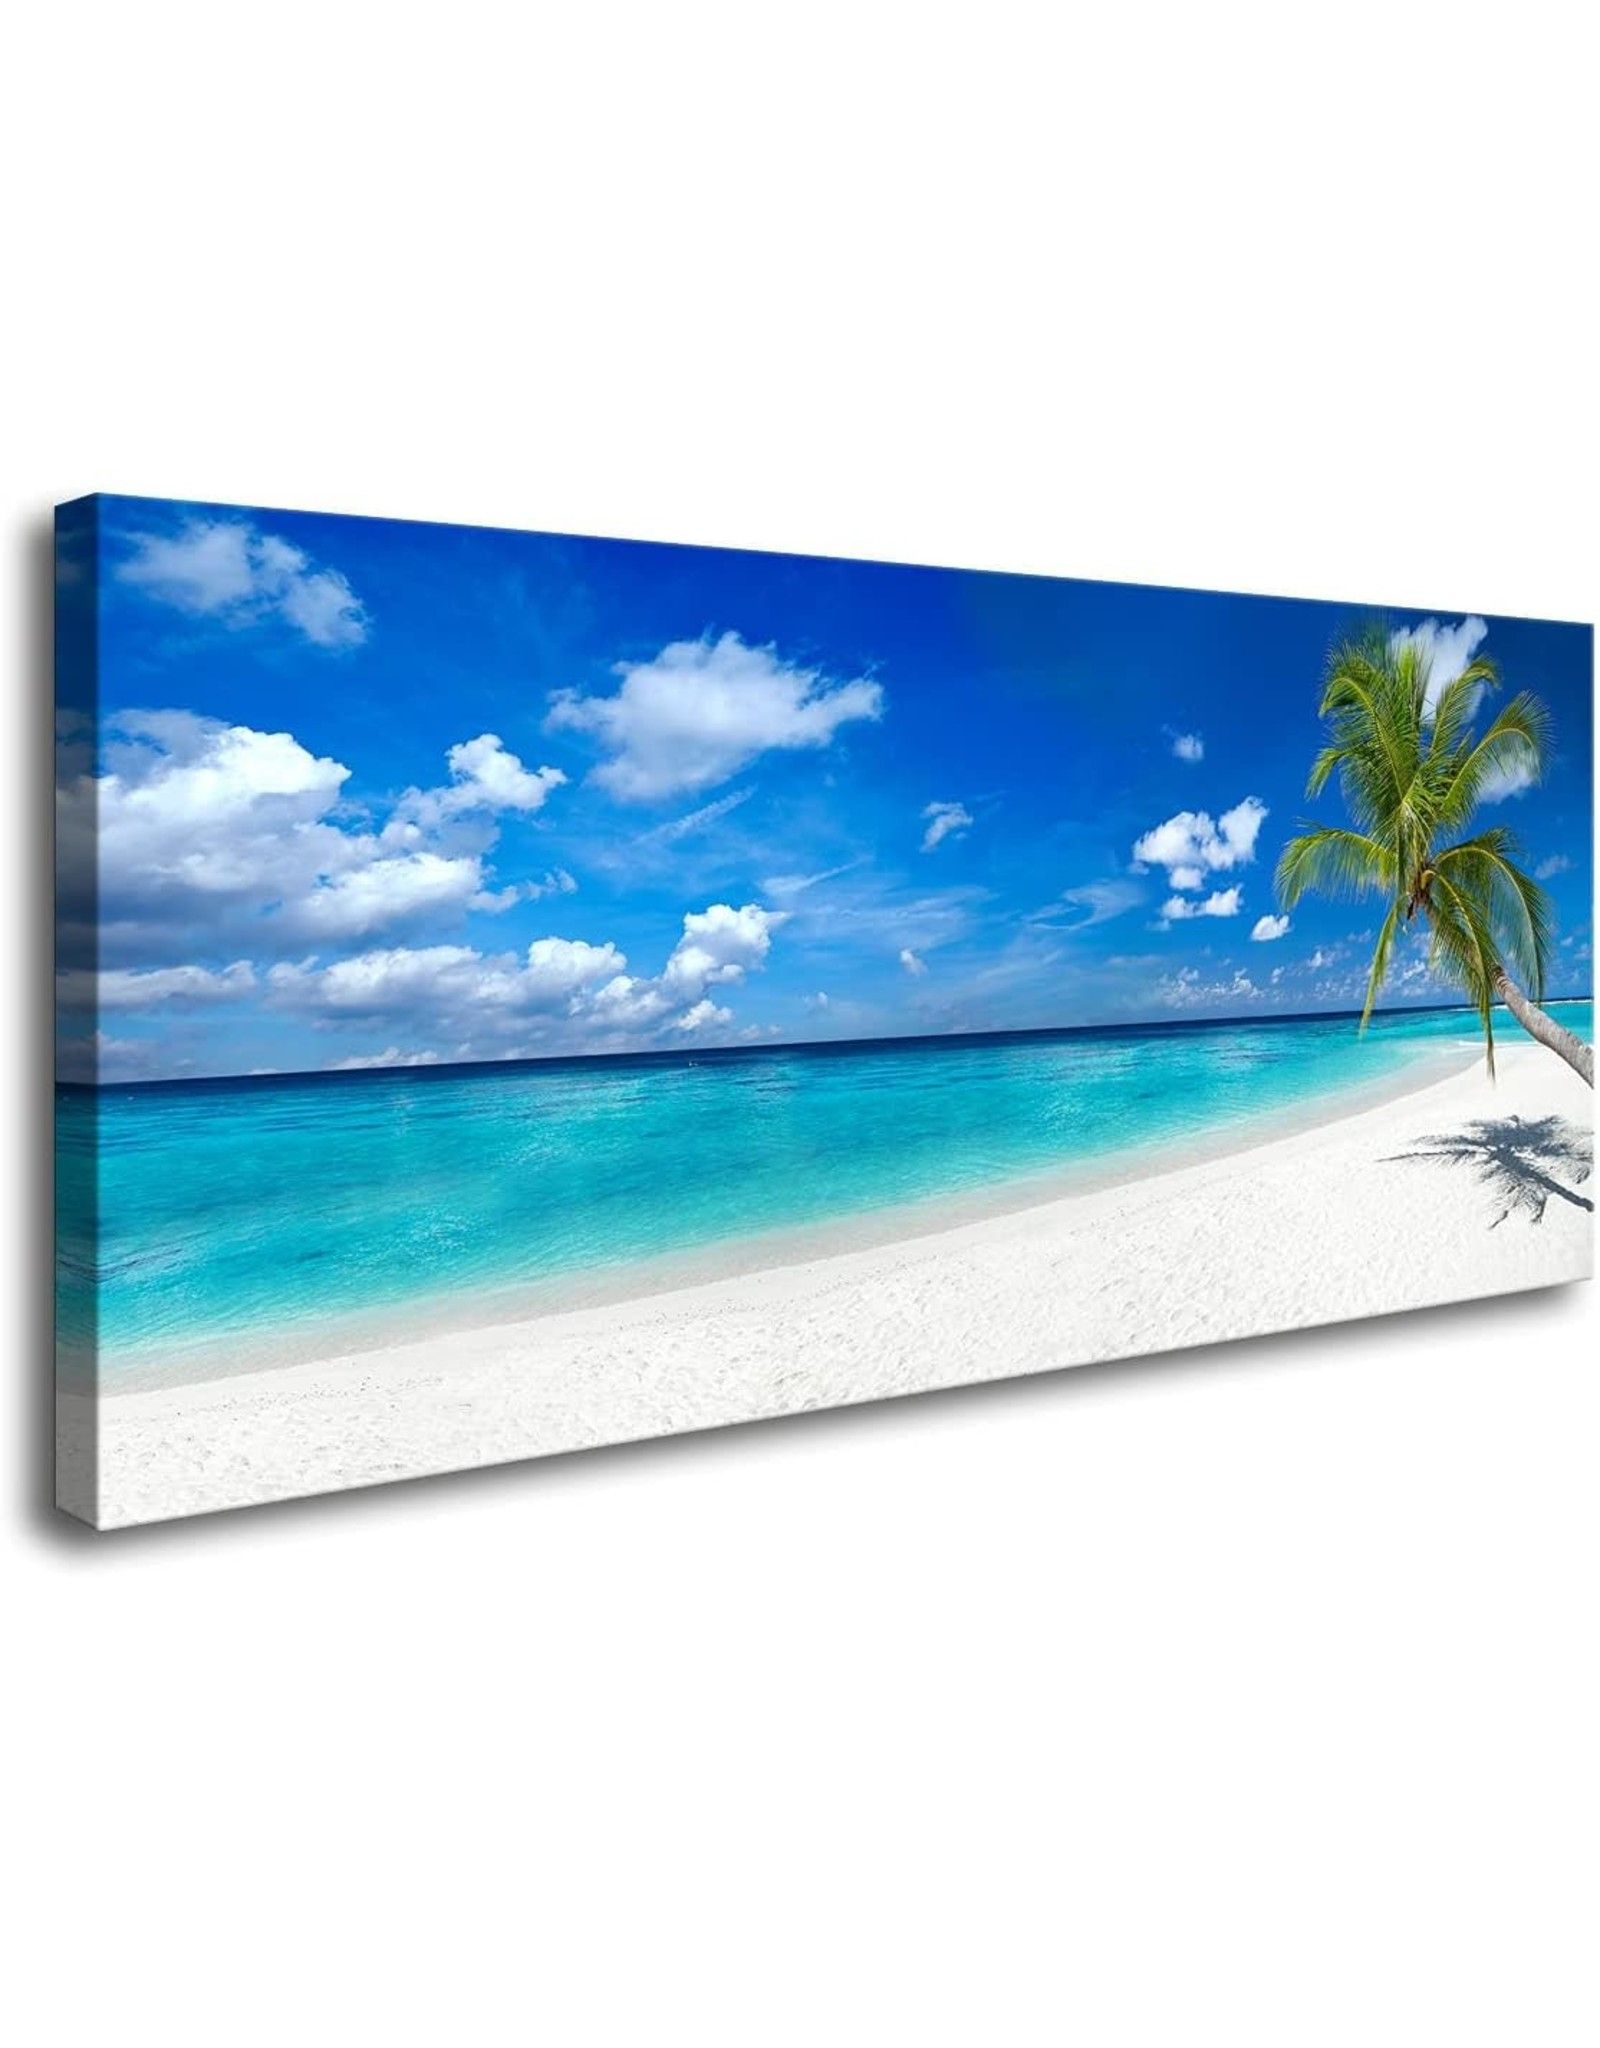 Xxmwallart Fc2475 Seascape Wall Art Tropical Paradise Beach With White Sand  And Coco Palms Canvas Wall Art Summer Beach Painting Sea Nature Pictures  For Living Room Bedroom Home And Office Wall Decor – Inside Tropical Paradise Wall Art (View 12 of 15)